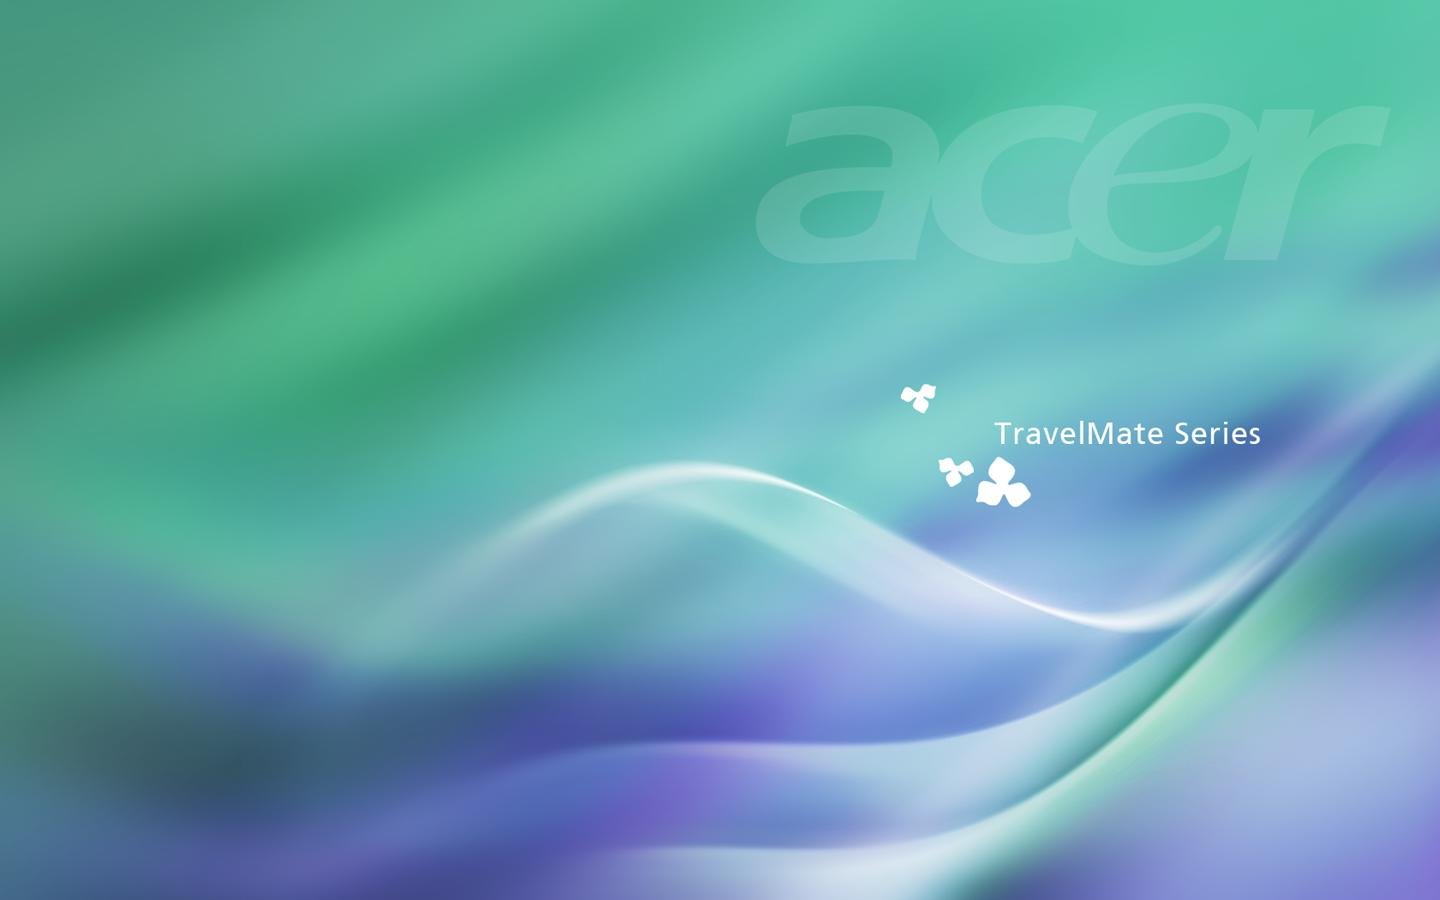 Acer TravelMate Series Acer Wallpapers Top Quality Acer Wallpapers